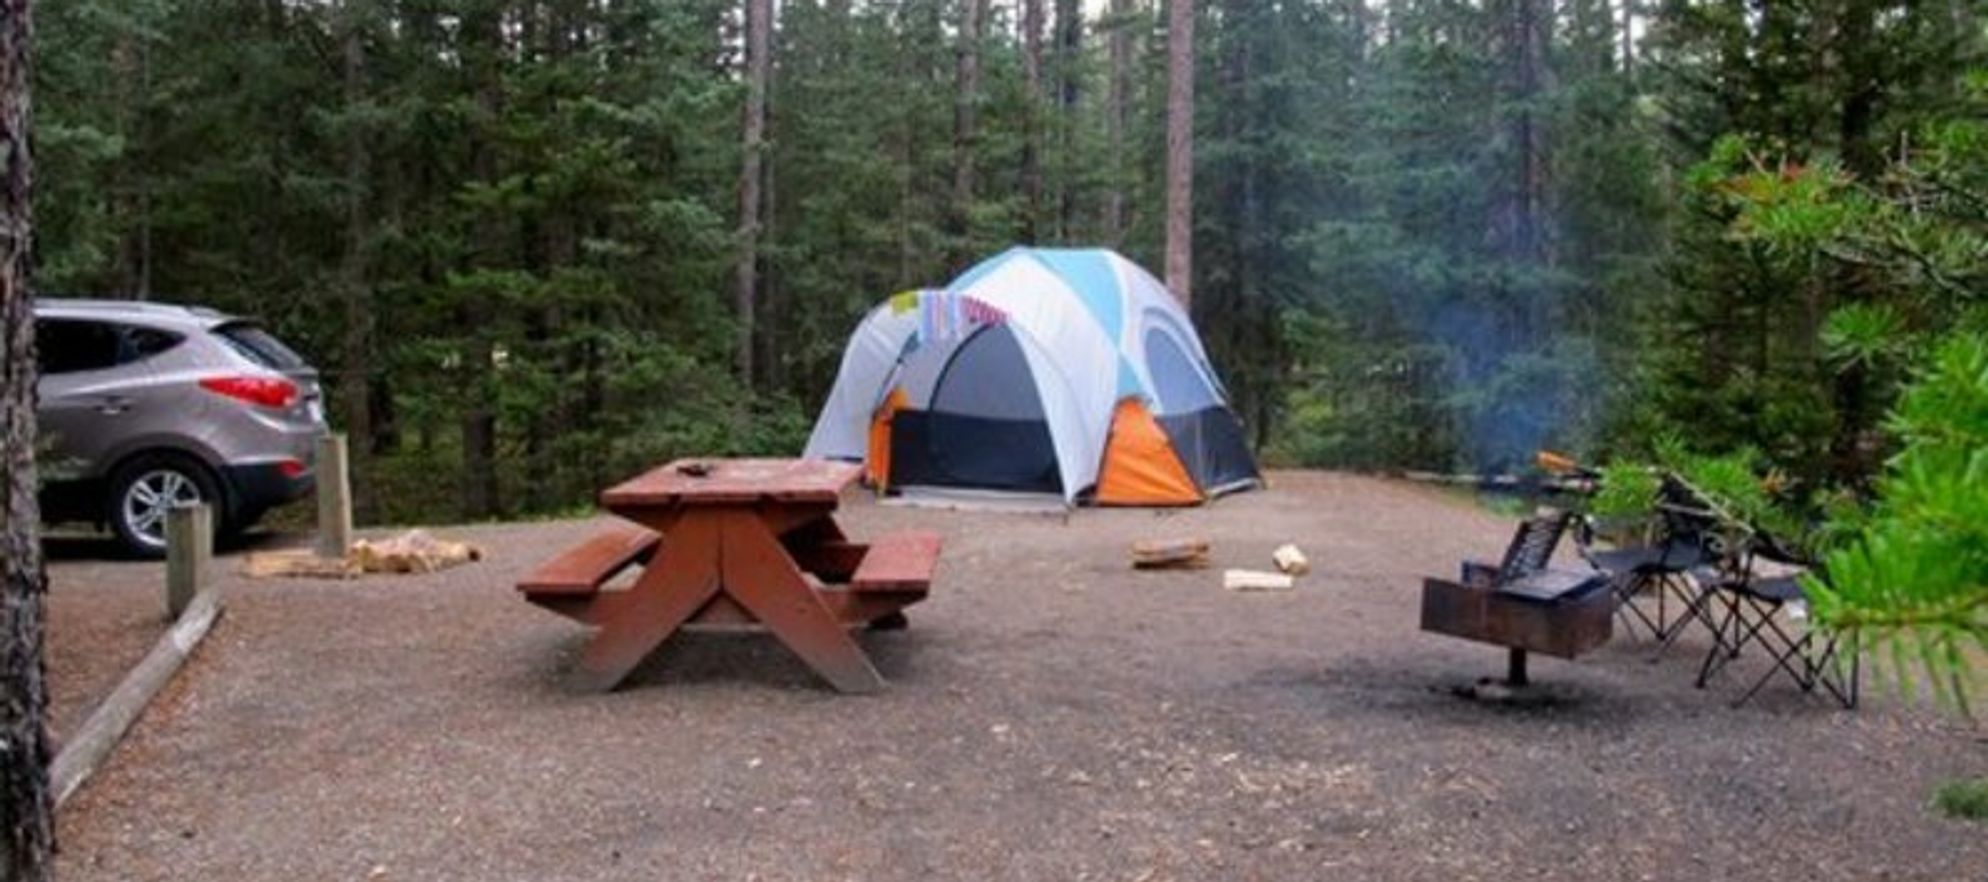 Lake Louise Campground - Tent